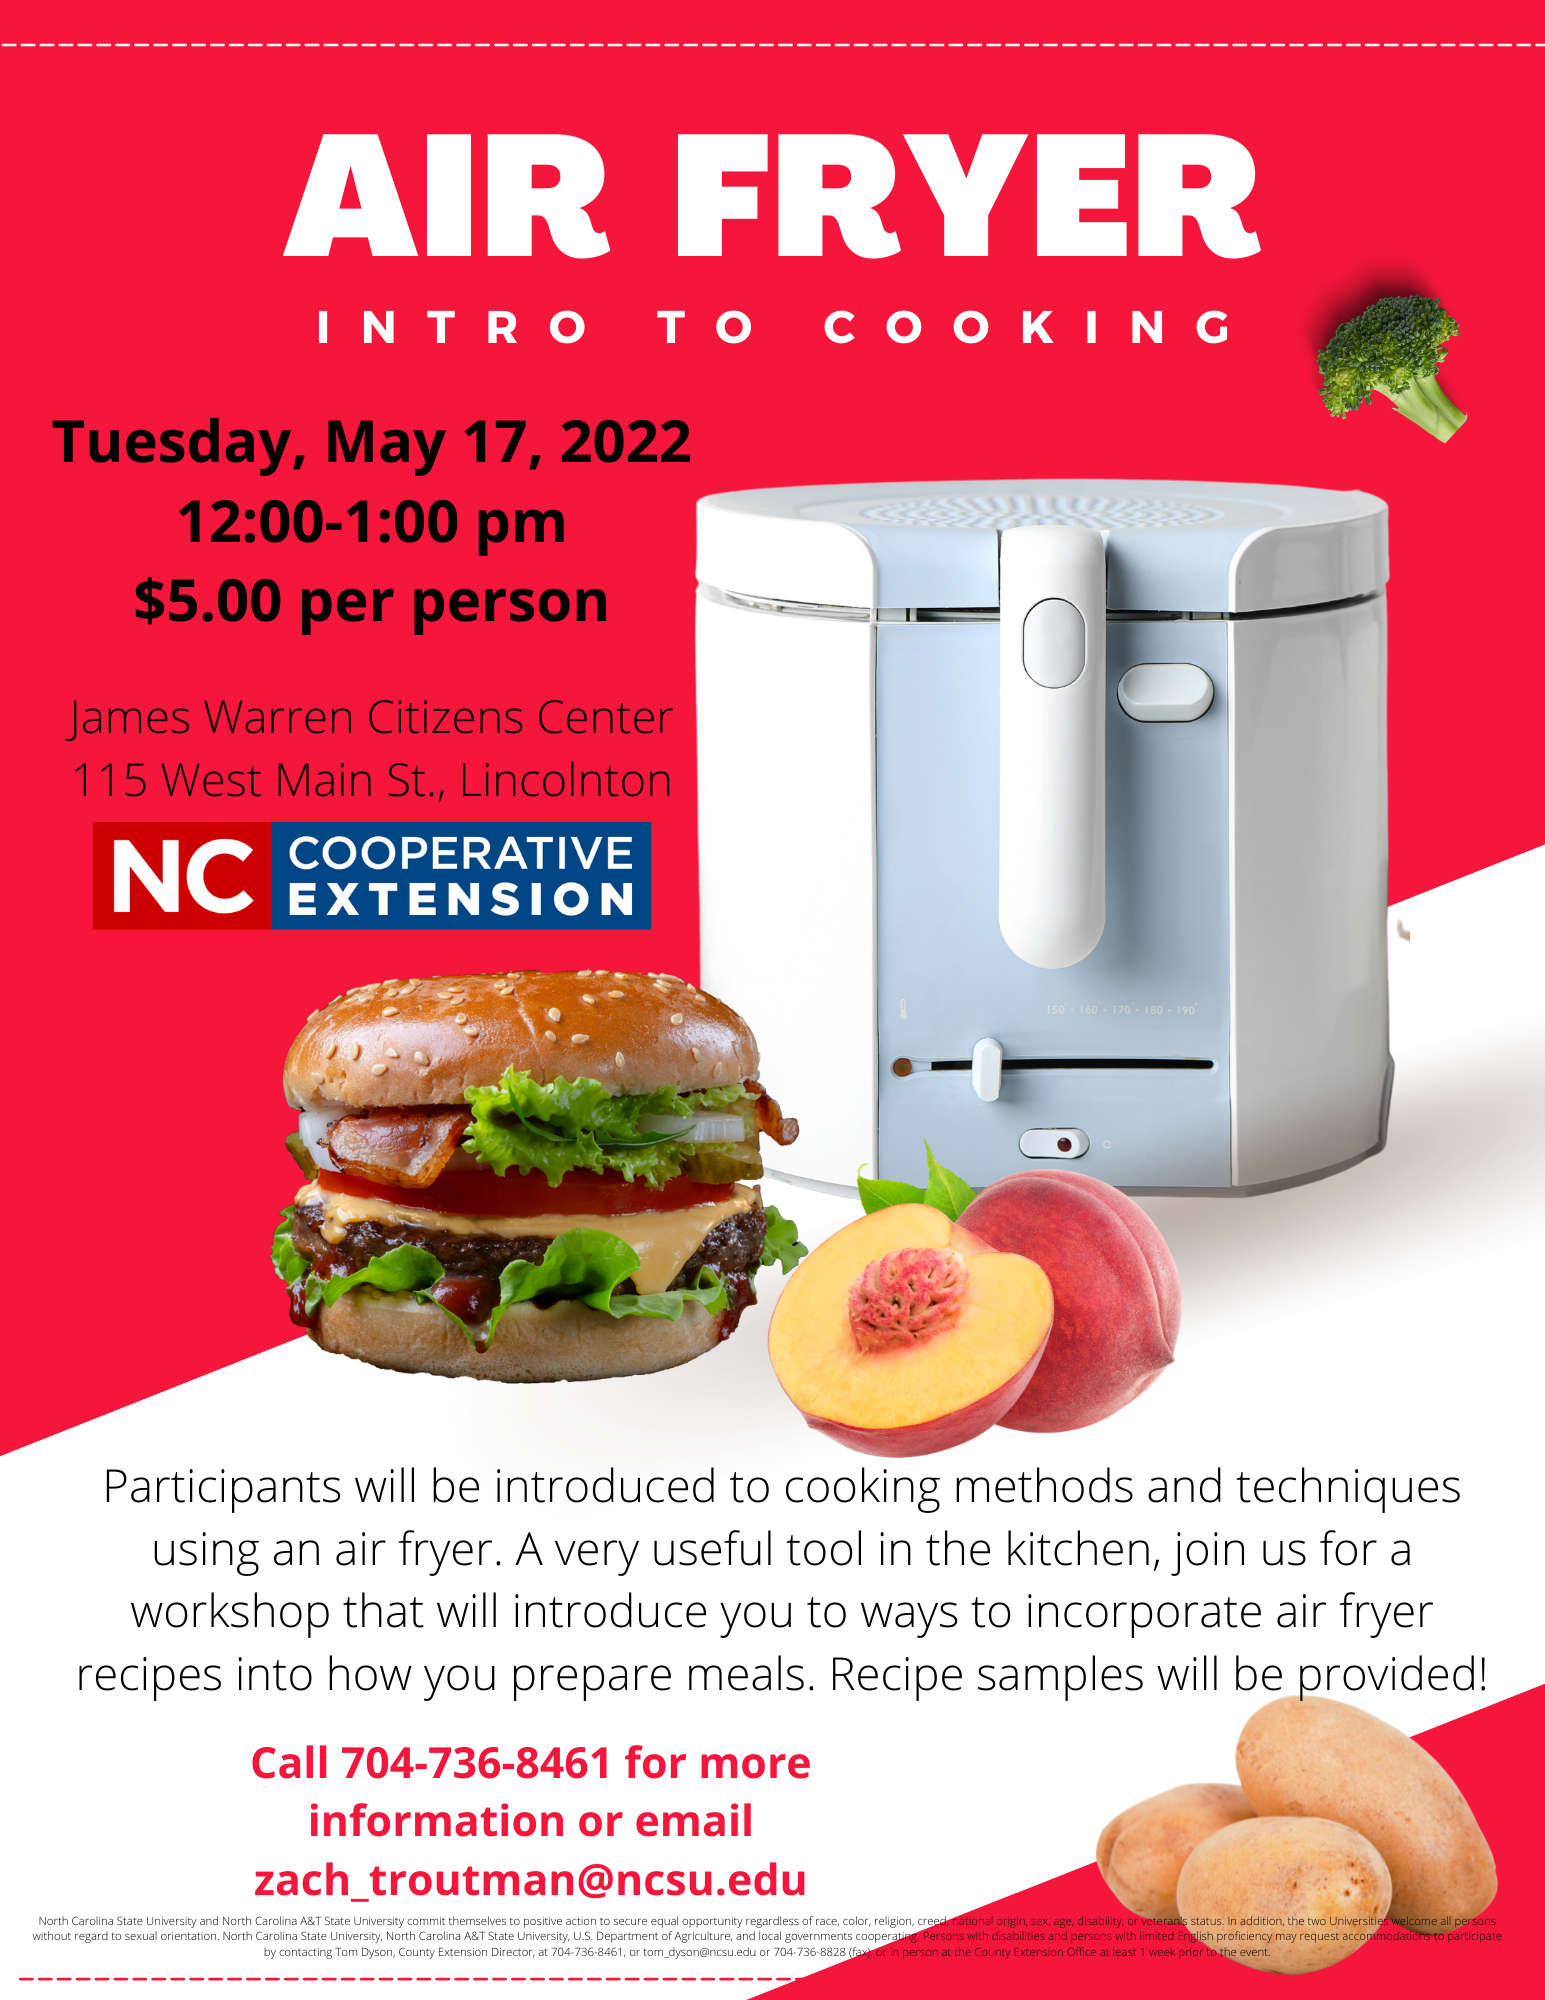 Join us for a work shop that will introduce you to ways to incorporate air fryer recipes into how you prepare meals. 